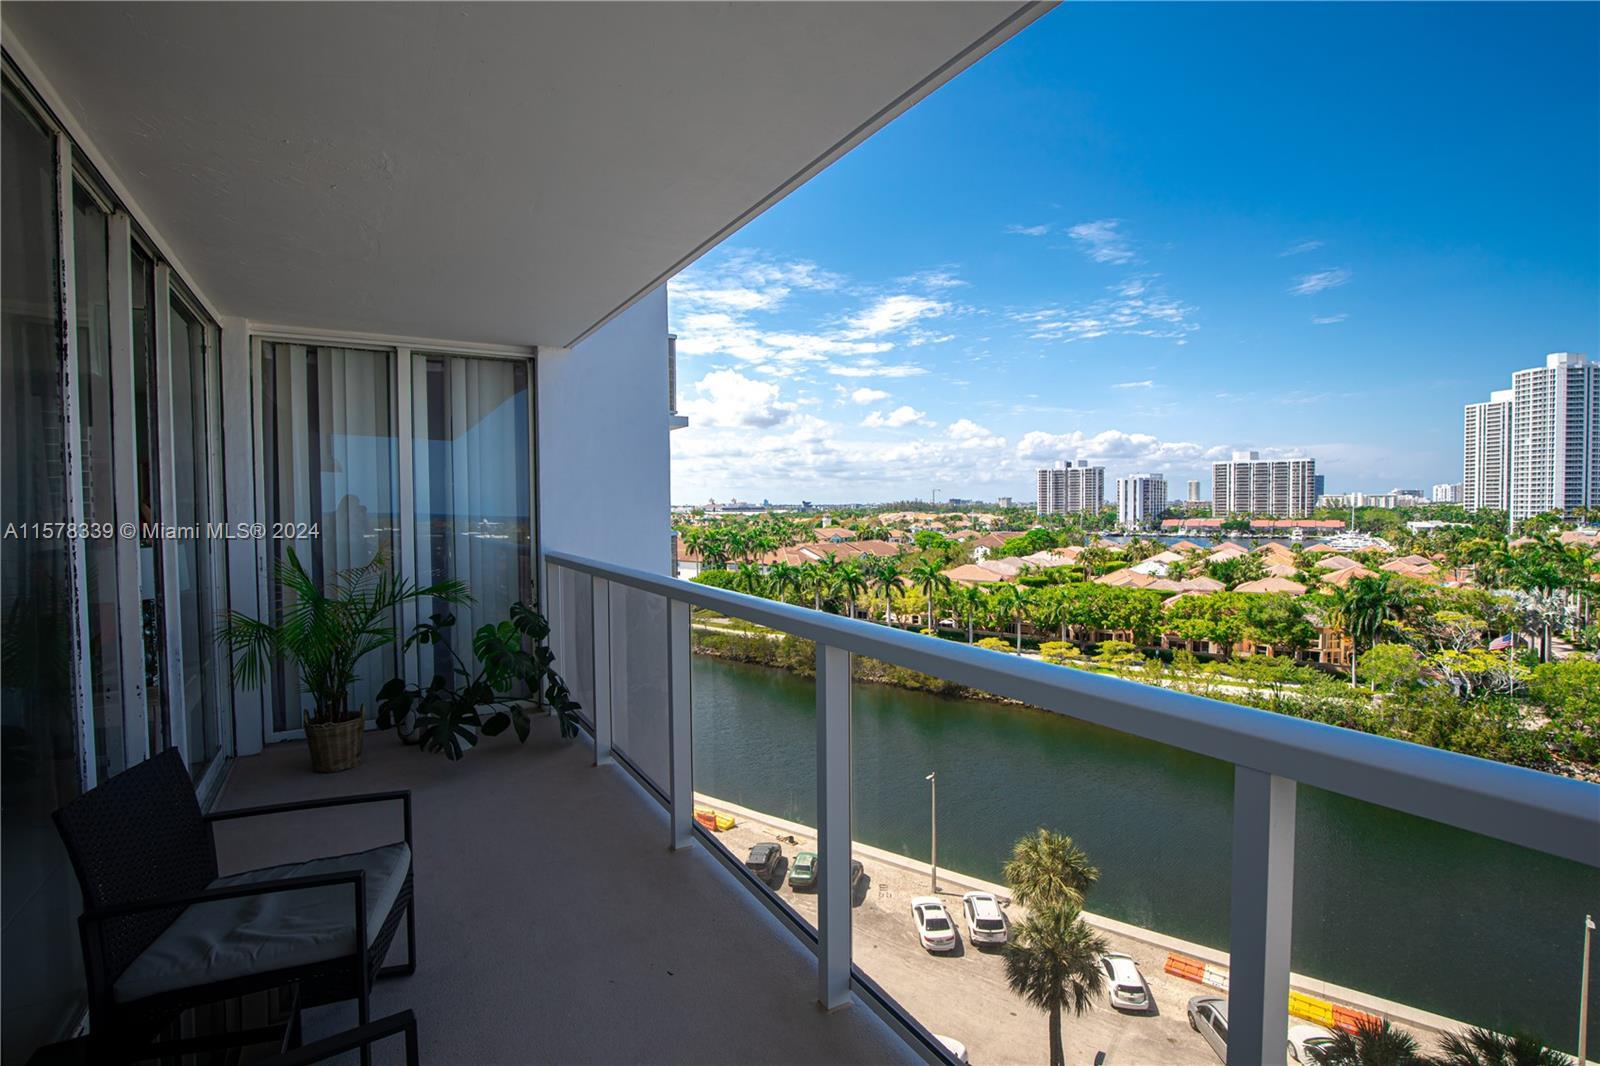 Photo of 3701 N Country Club Dr #902 in Aventura, FL